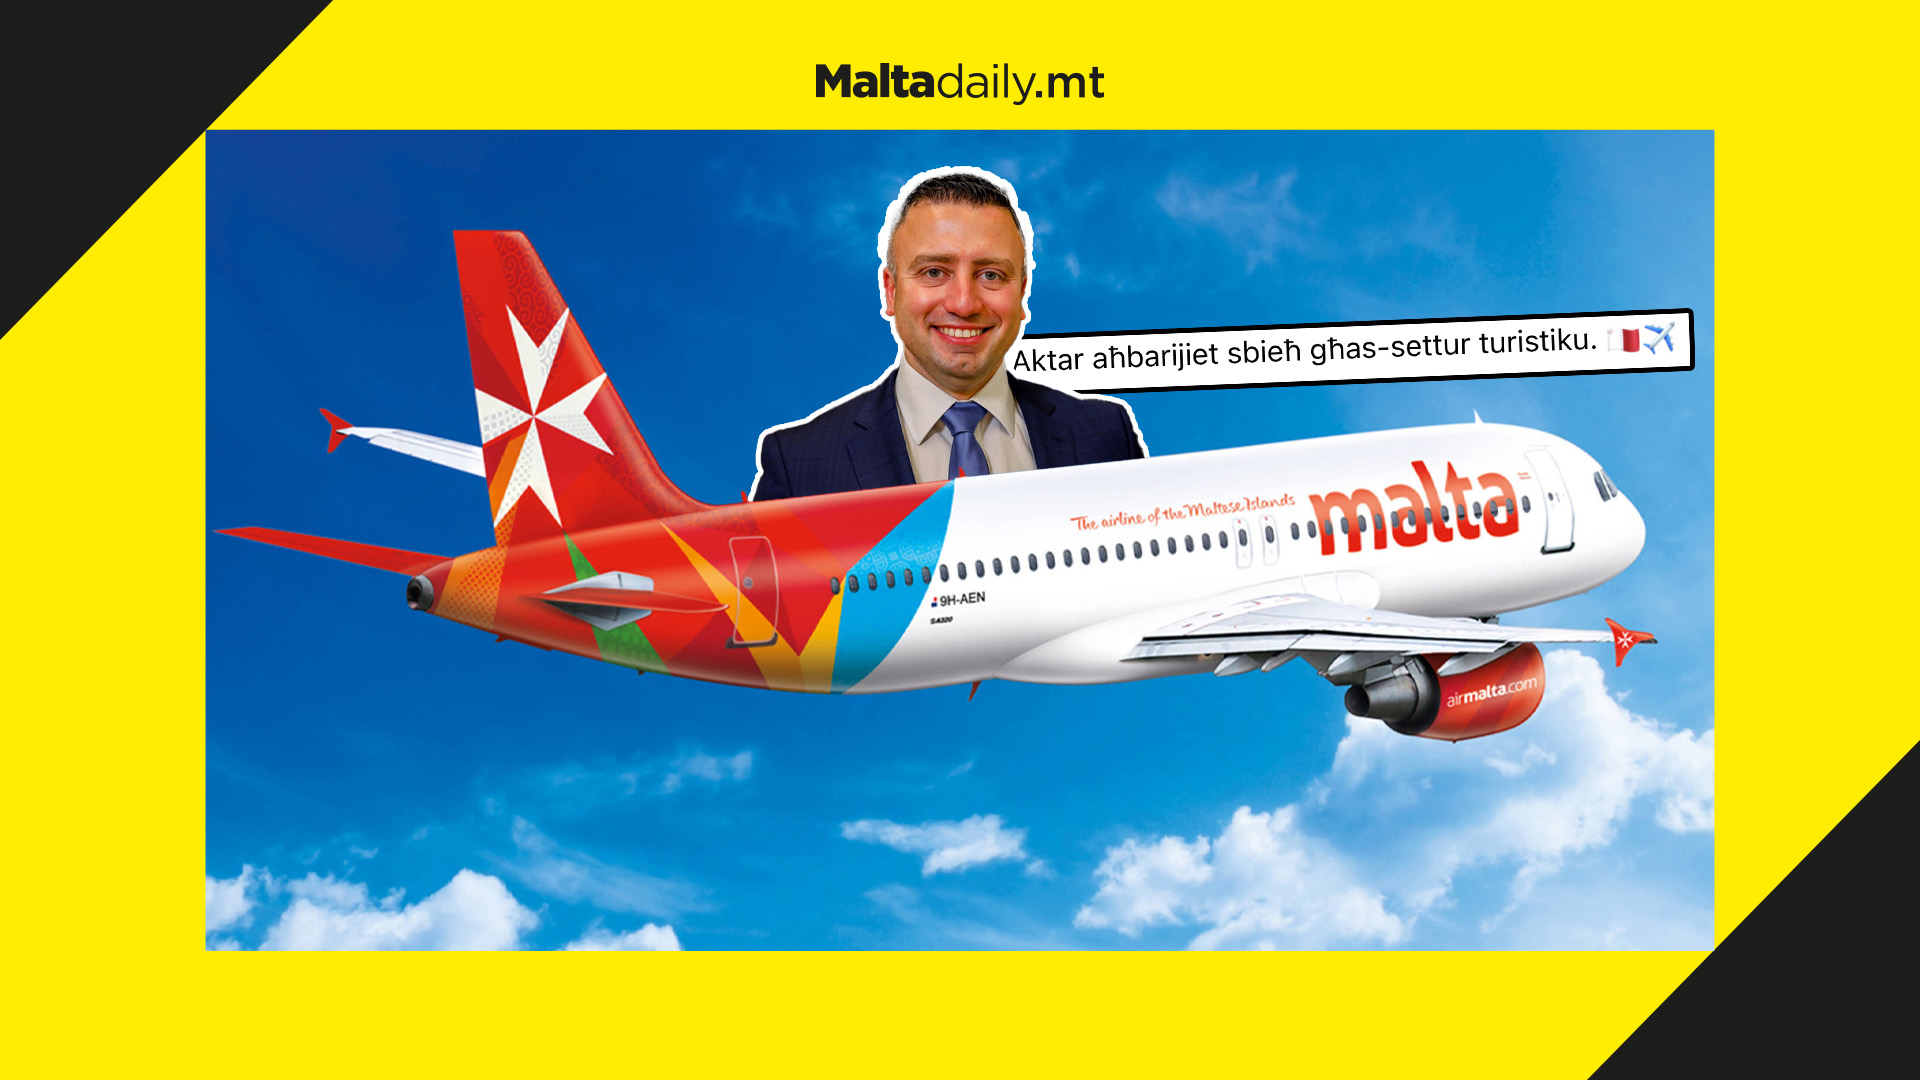 Air Malta leases extra plane to meet demand as tourism continues to recover